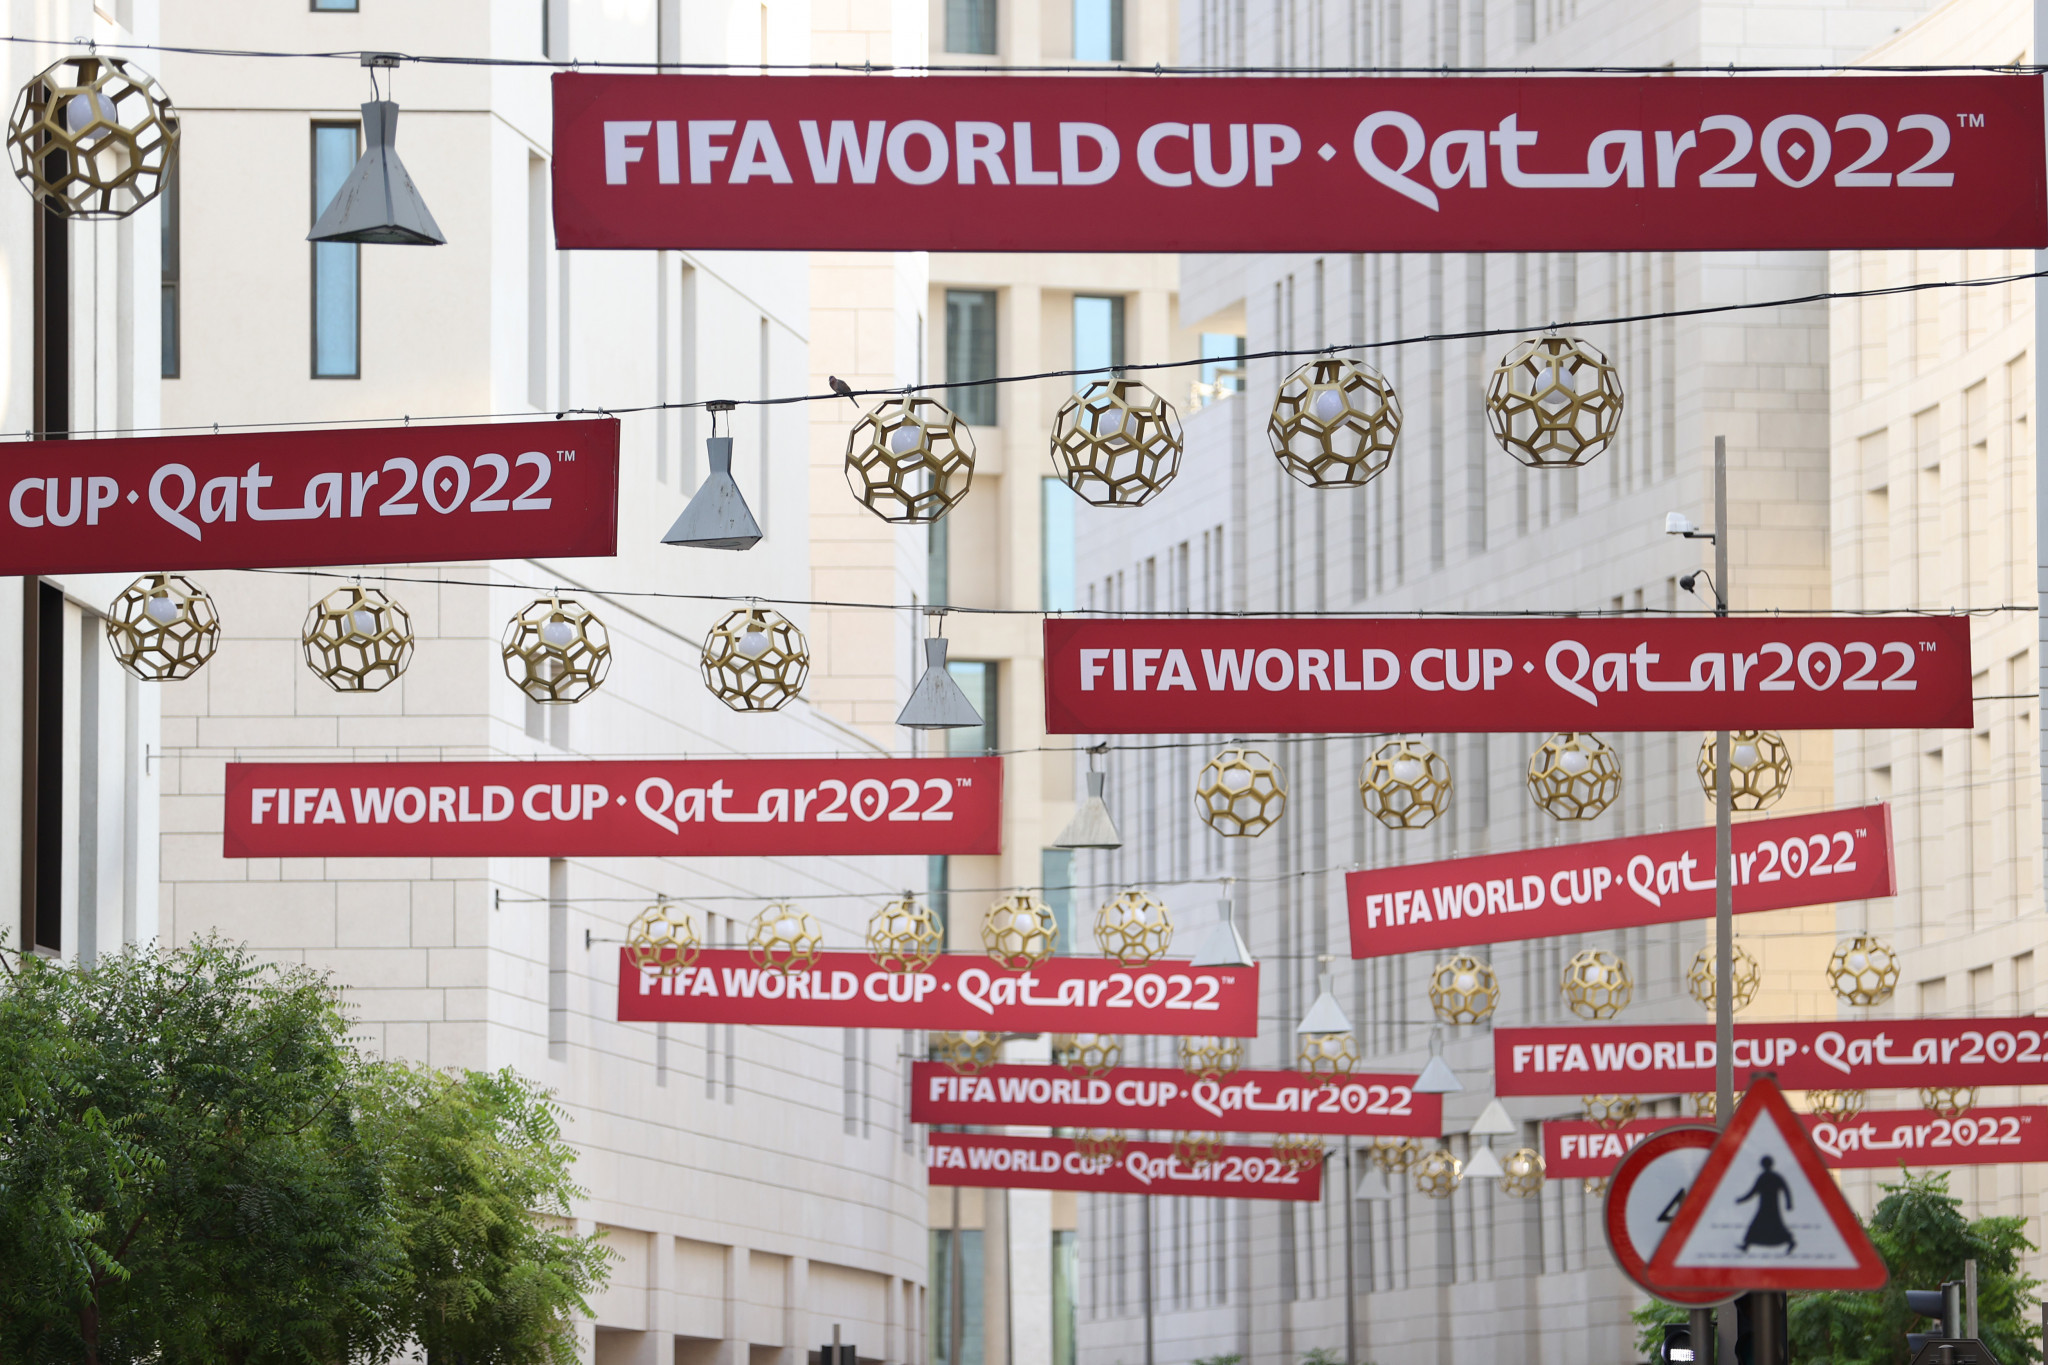 The countdown is continuing to the Qatar 2022 FIFA World Cup, with concerns surrounding human rights and same-sex relationships overshadowing the tournament build-up ©Getty Images